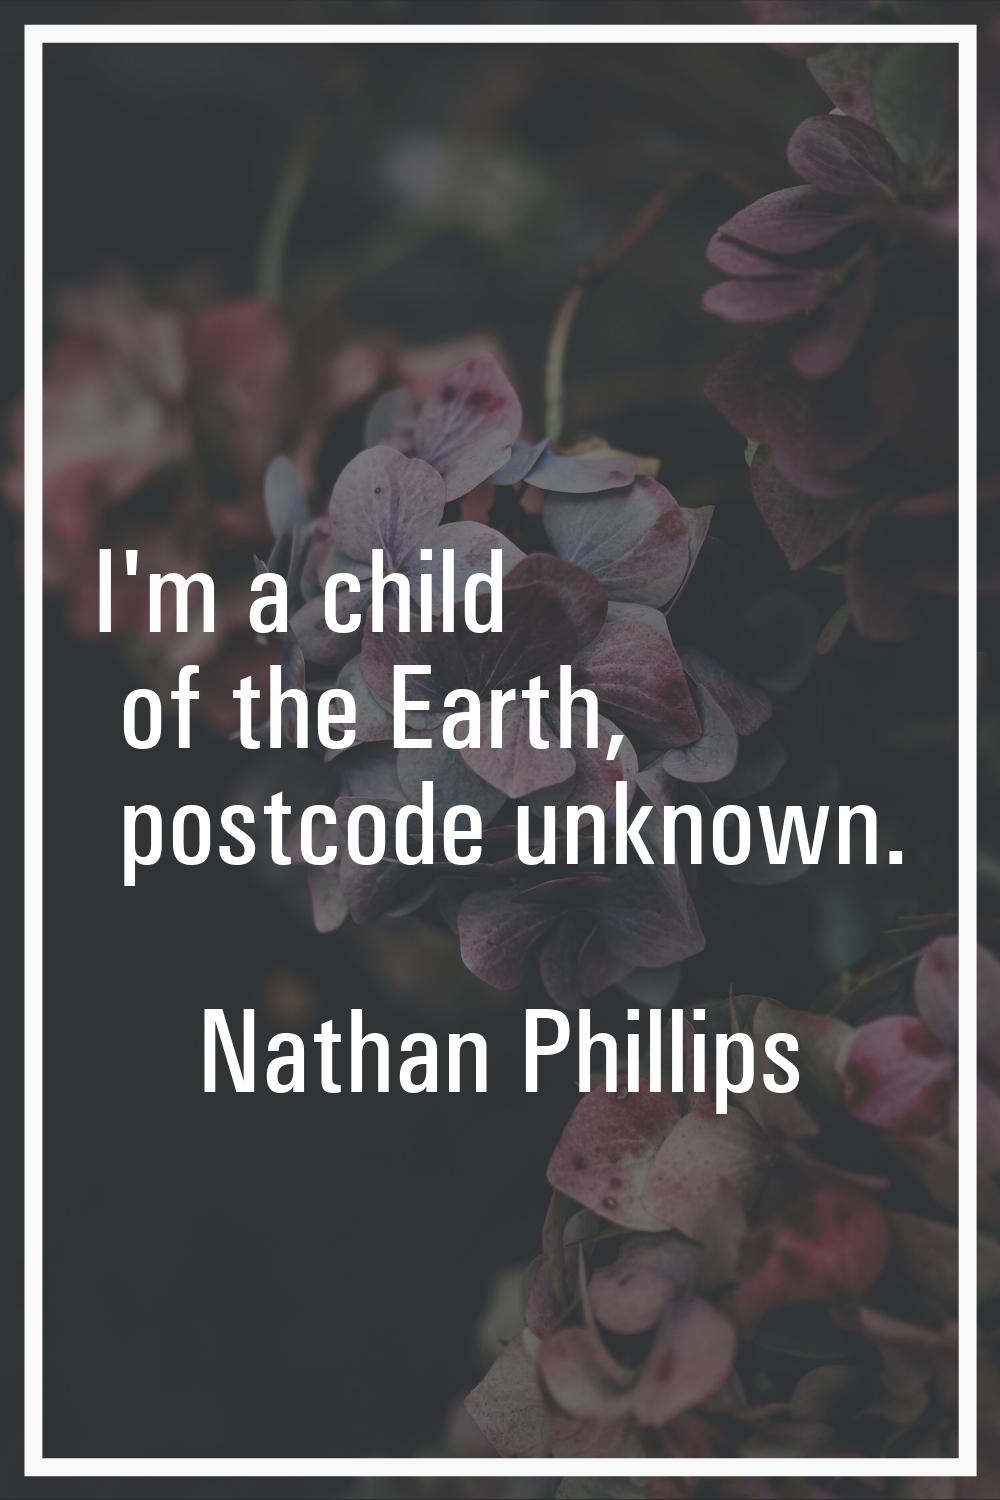 I'm a child of the Earth, postcode unknown.